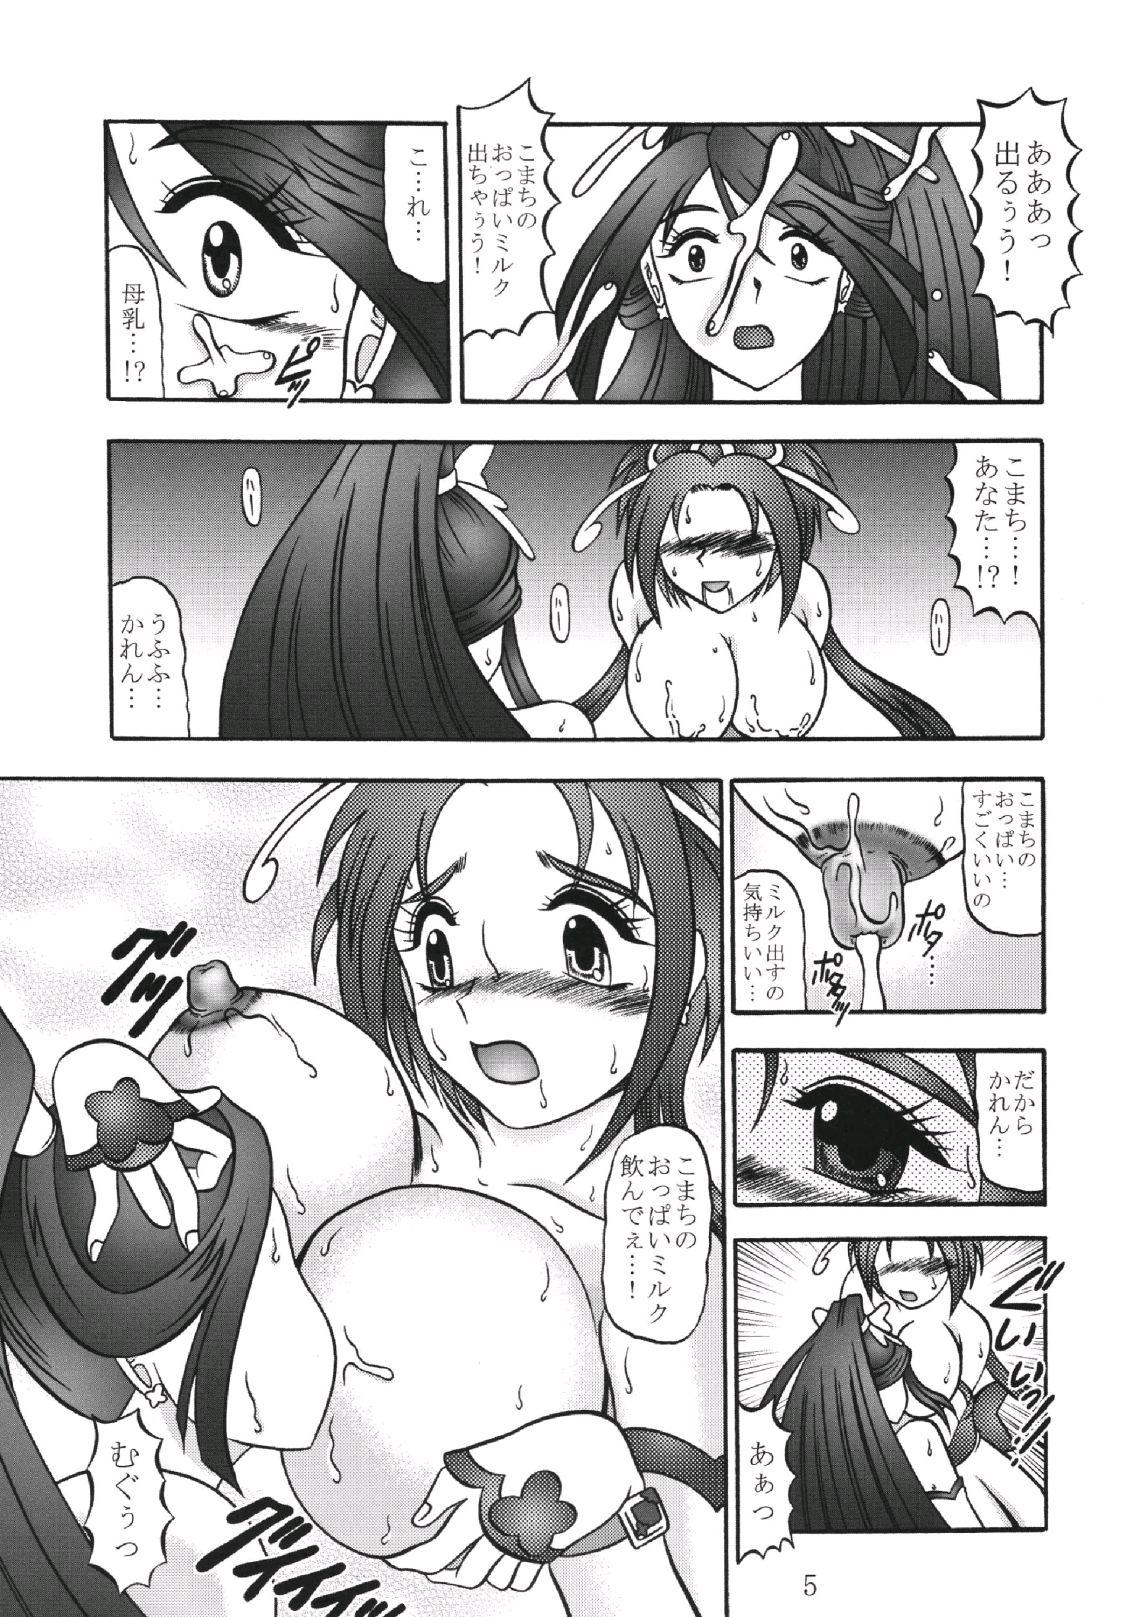 Ass Fucked GREATEST ECLIPSE Kochou Side:B - Yes precure 5 Missionary Position Porn - Page 5